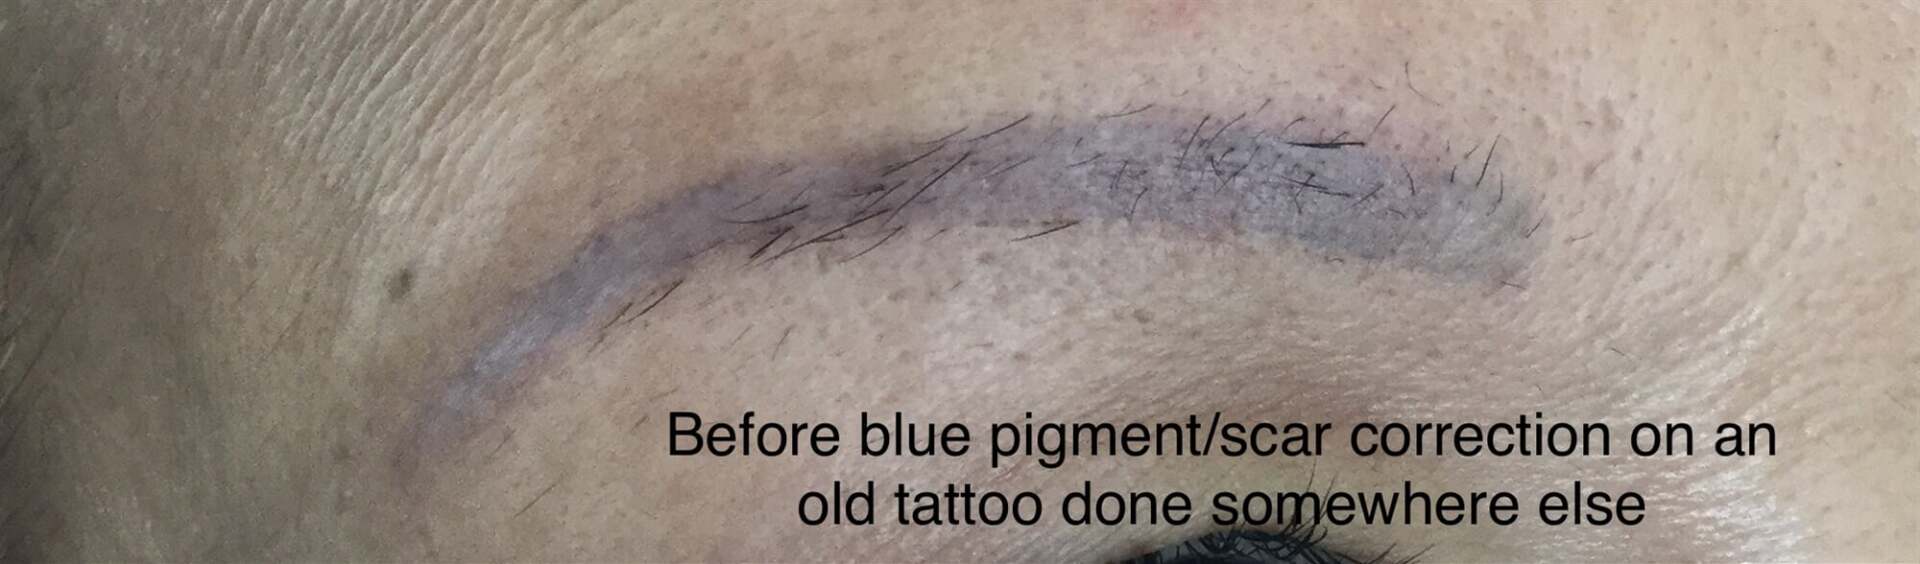 Before Scar Correction On Old Tattoo — Cosmetic Tattooing in Bundaberg, QLD